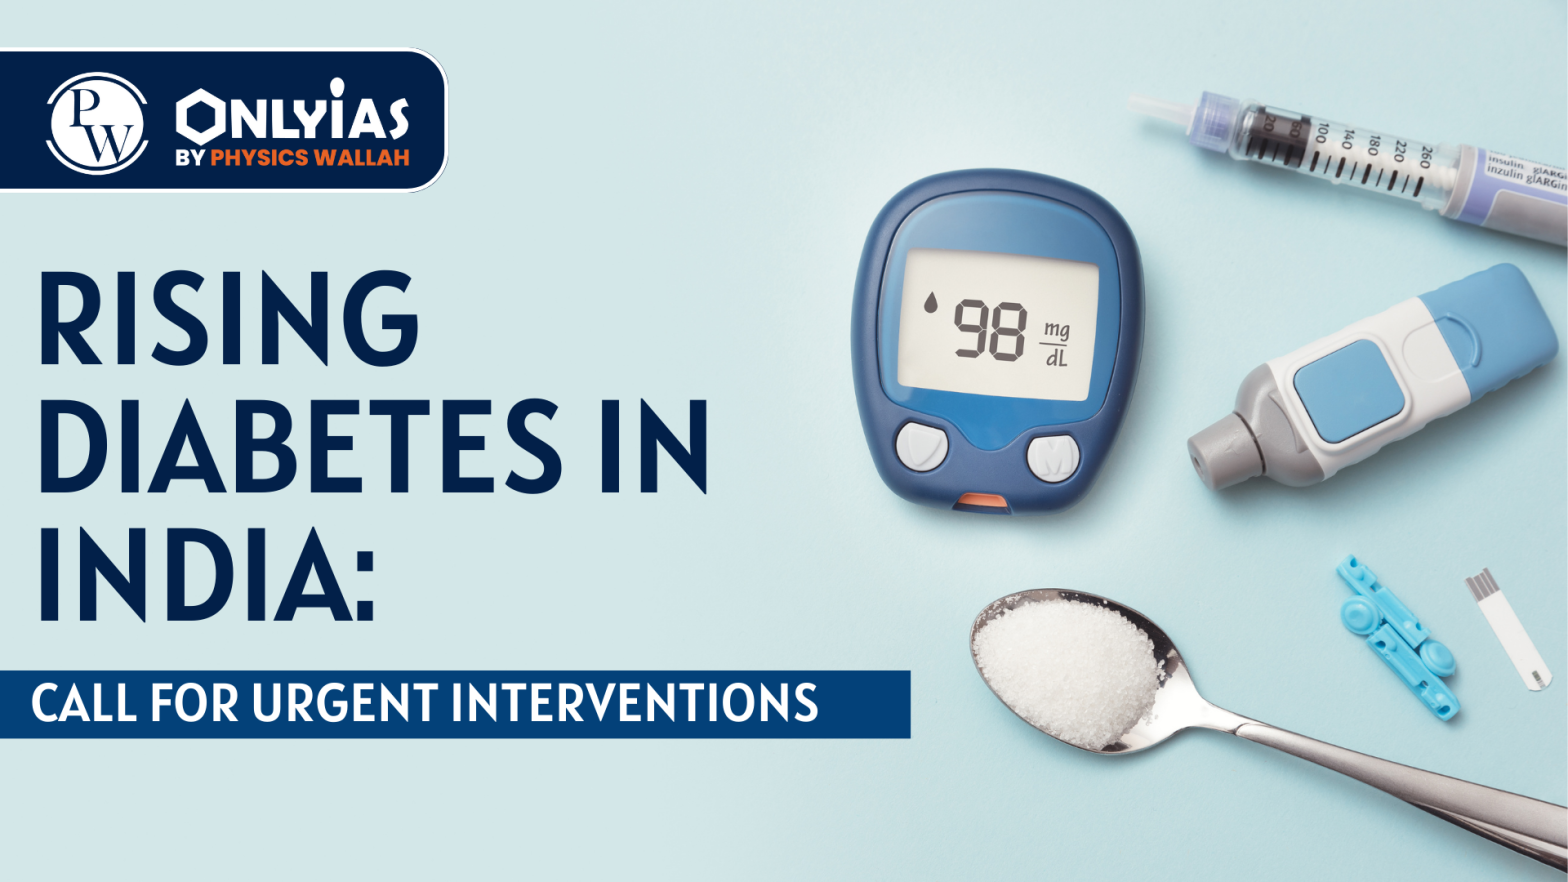 Rising Diabetes in India: Call for Urgent Interventions